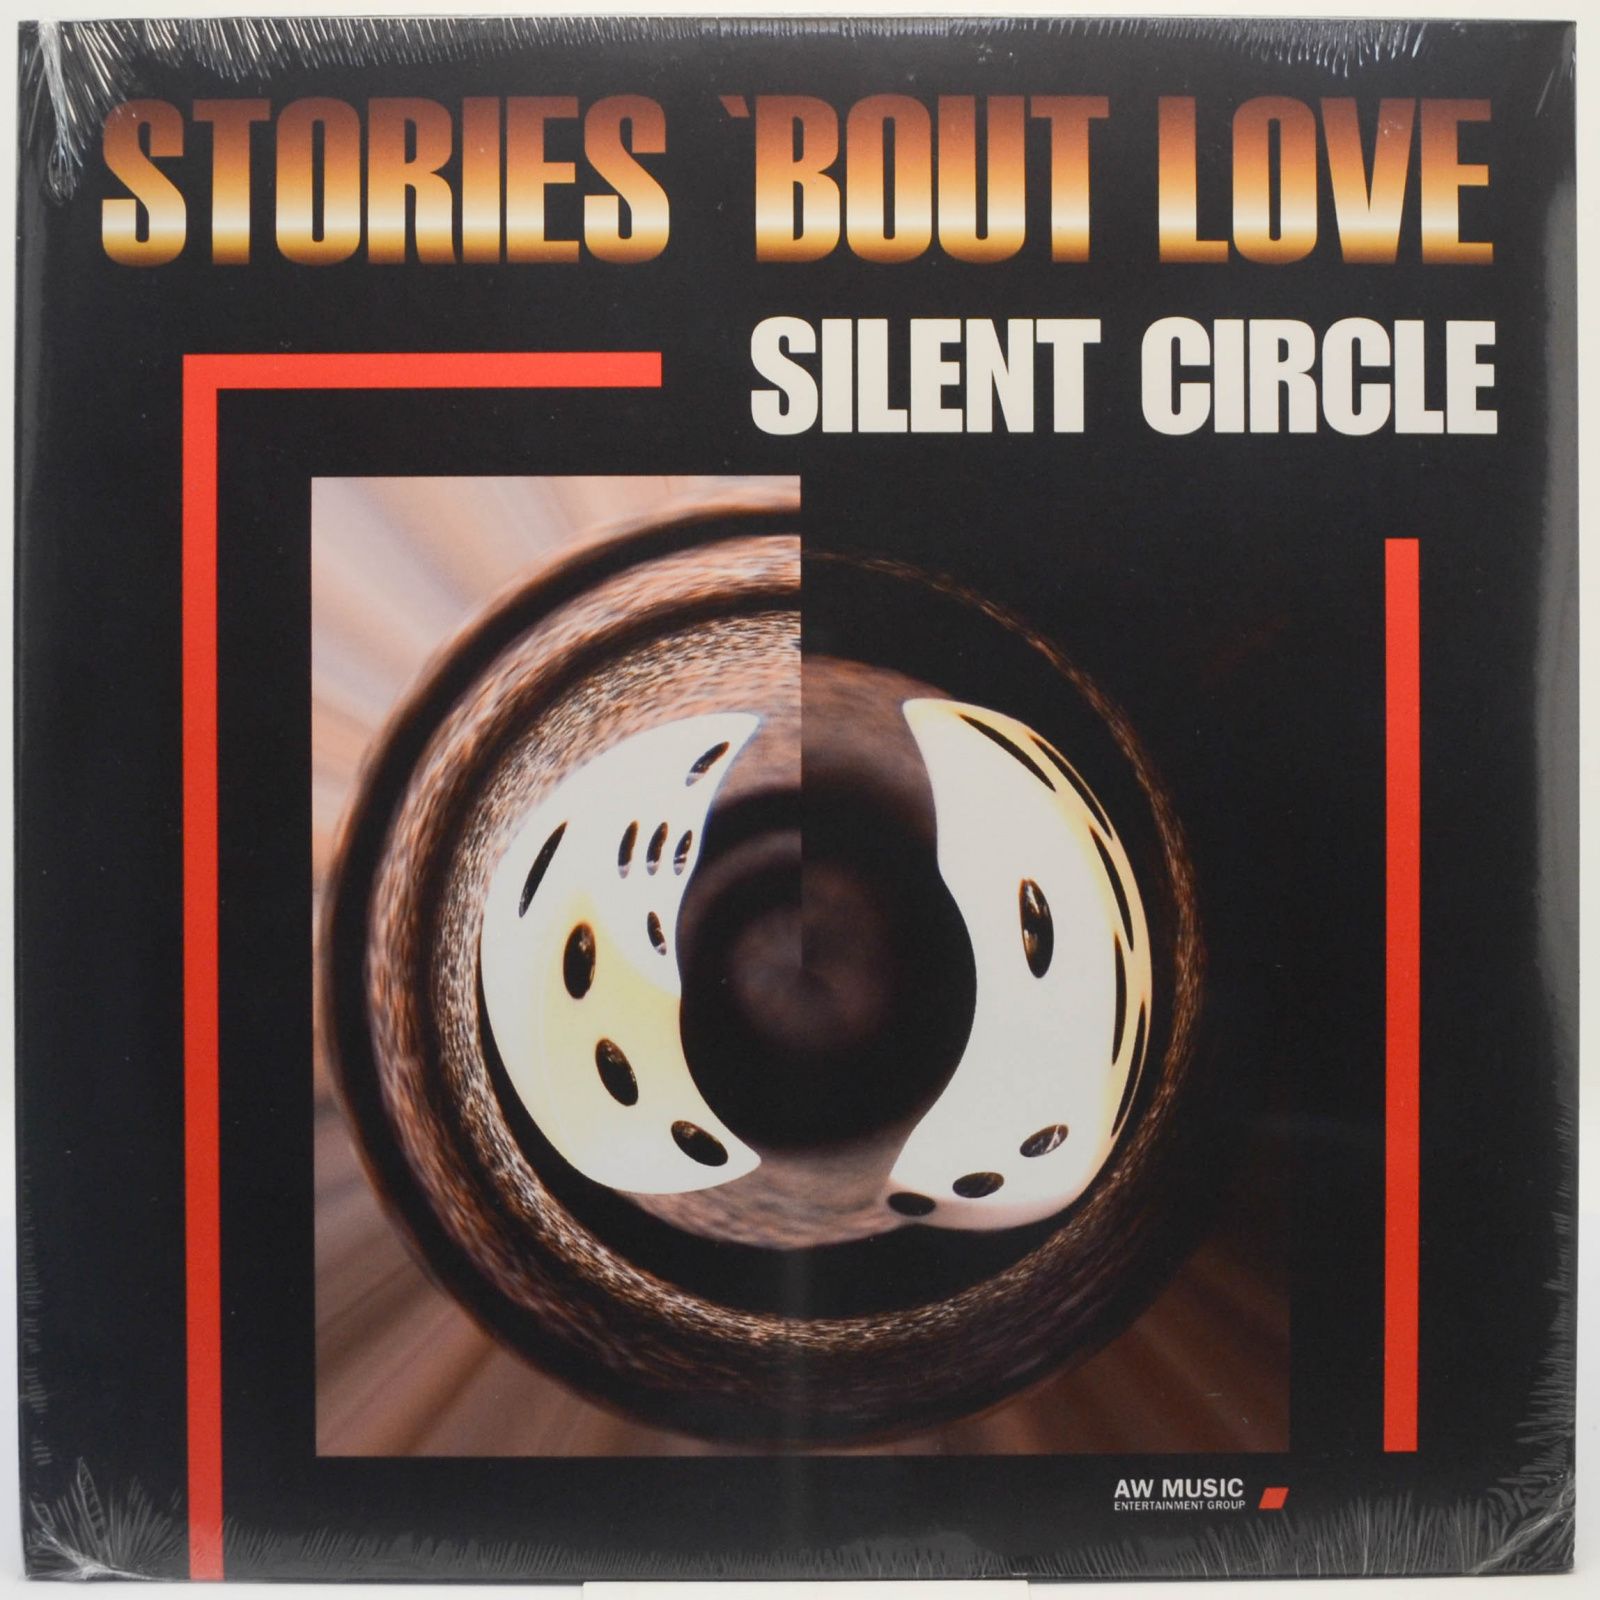 Silent Circle — Stories ‘Bout Love, 1998